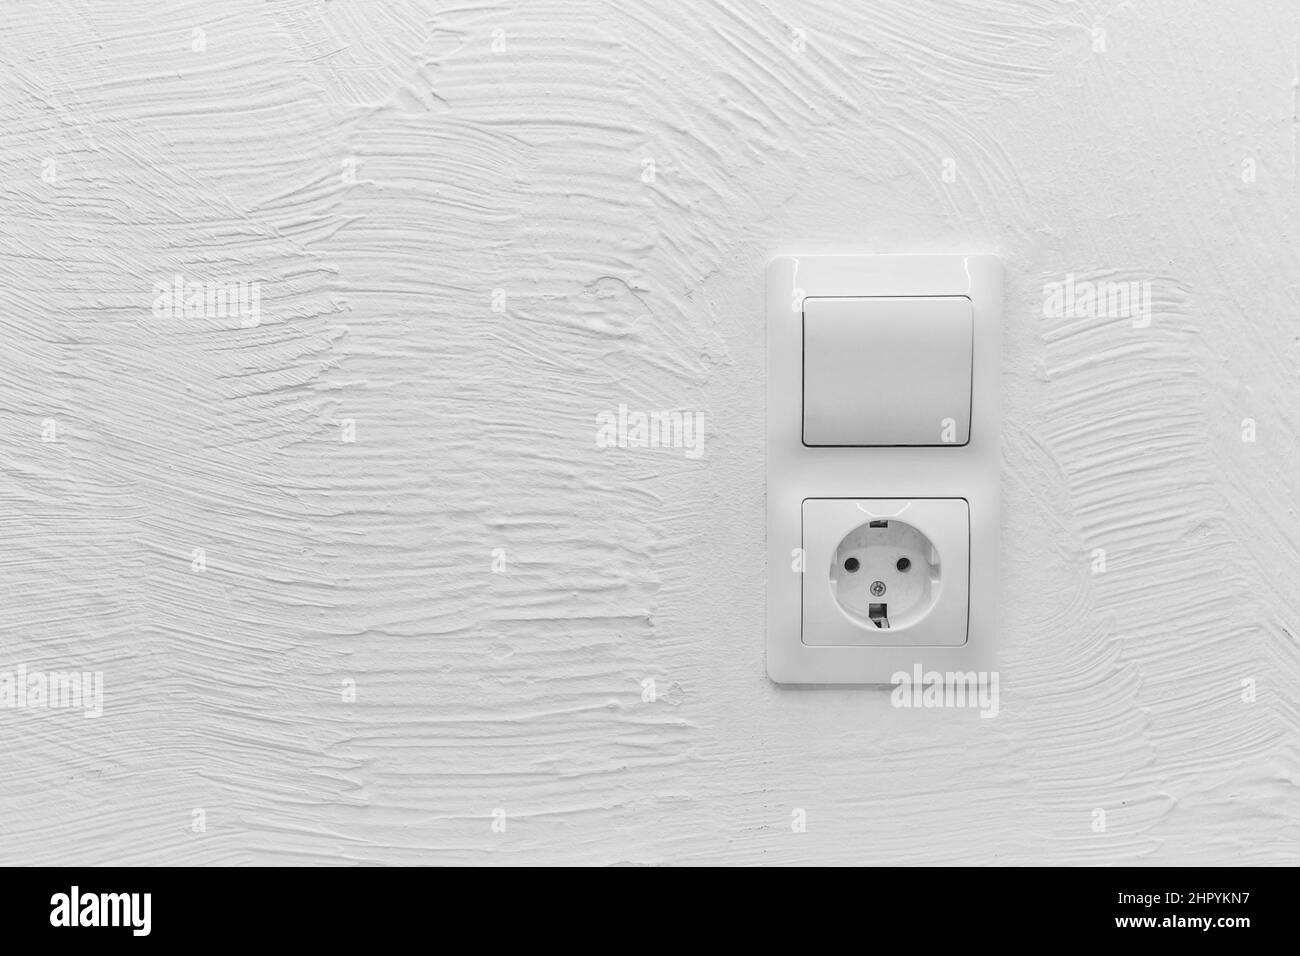 Socket and light off turn on button on the background of the switch white wall of the house, close up. Stock Photo